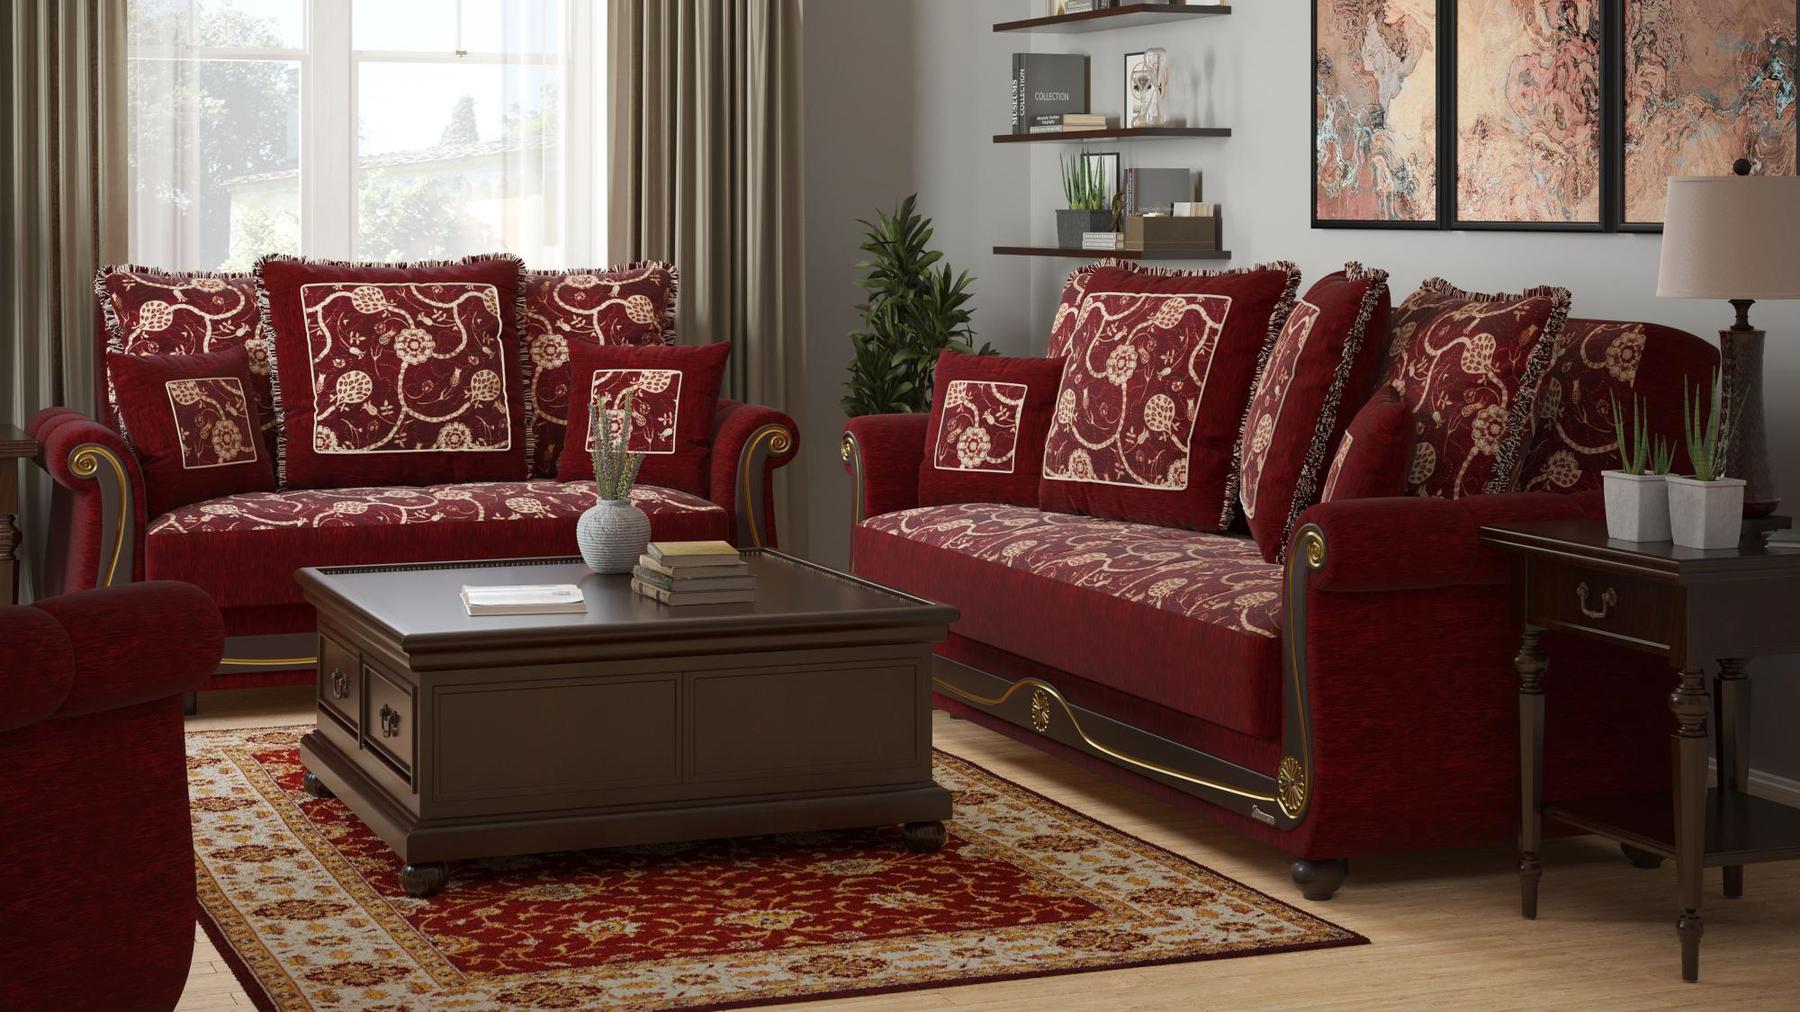 Lawson design, Burgundy , Chenille upholstered convertible sleeper Loveseat with underseat storage from Victoria by Ottomanson in living room lifestyle setting with another piece of furniture. This Loveseat measures 71 inches width by 40 inches depth by 40 inches height.